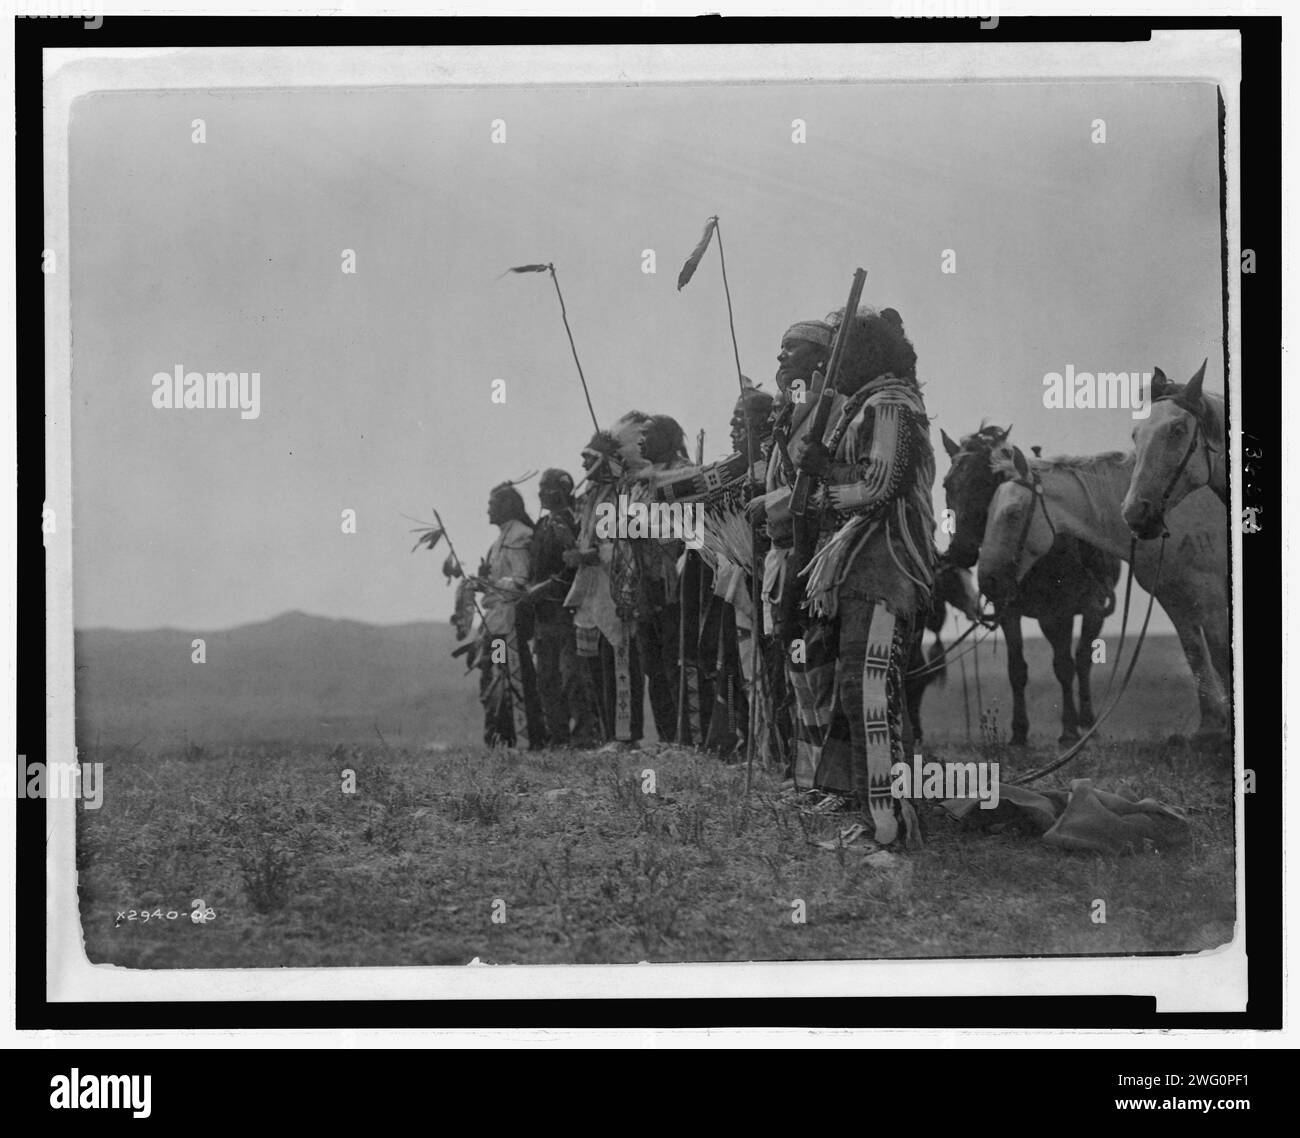 Awaiting the scouts return, Atsina, c1908. Photograph shows a group of Atsina men on a hill with their horses. Stock Photo